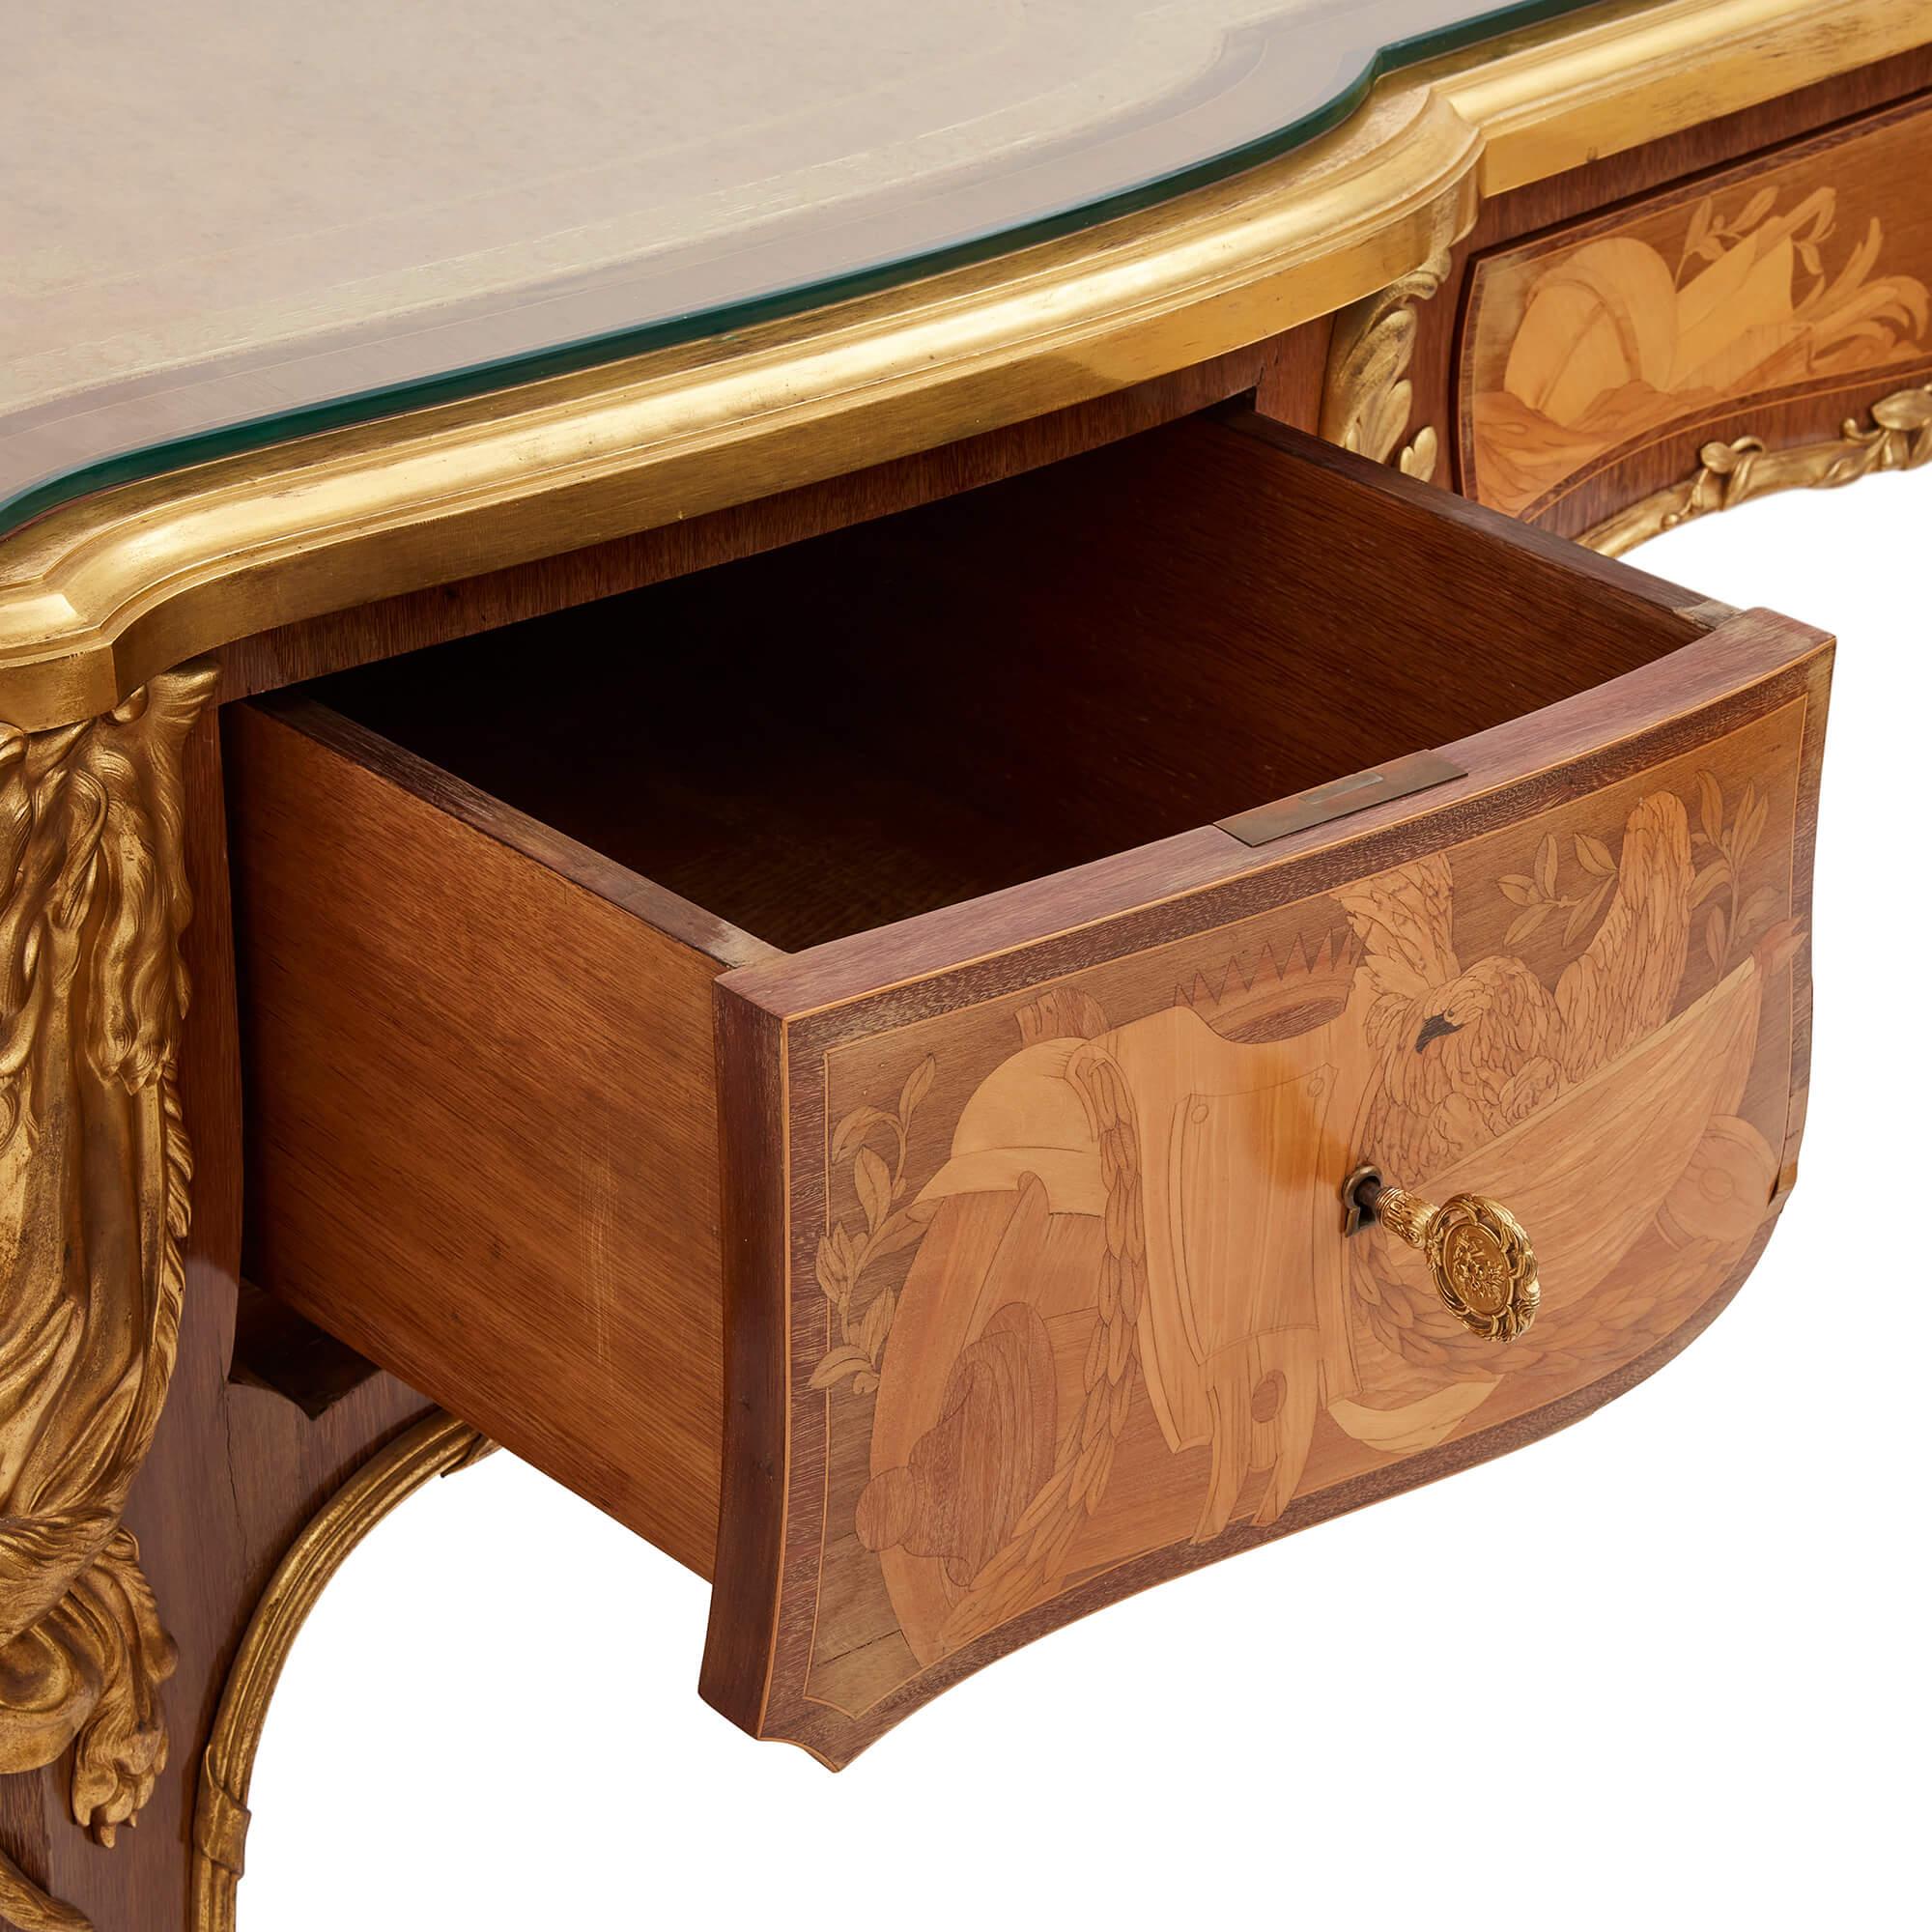 Antique French Louis XV Style Ormolu Mounted Marquetry Desk by Maison Léger For Sale 6